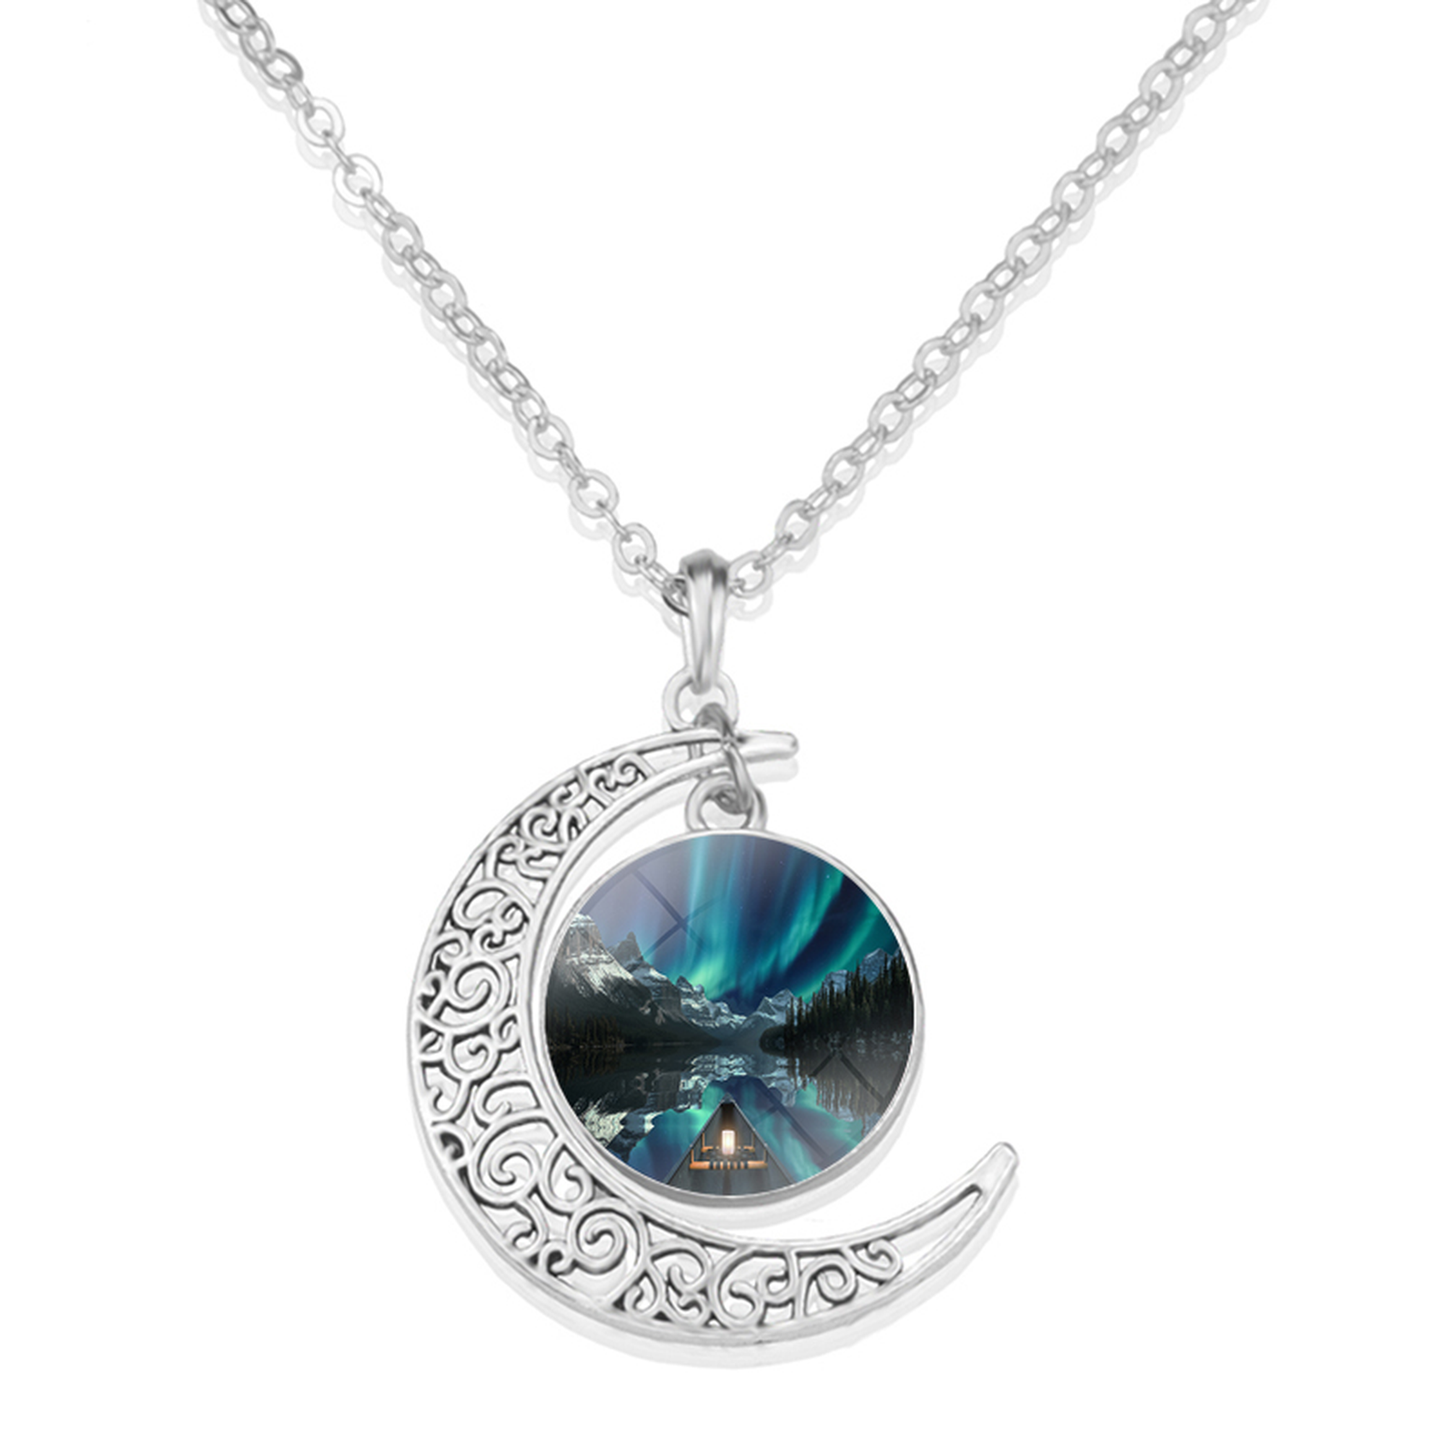 Unique Aurora Borealis Crescent Necklace - Northern Light Jewelry - Crescent Glass Cabochon Pendent Necklace - Perfect Aurora Lovers Gift 16